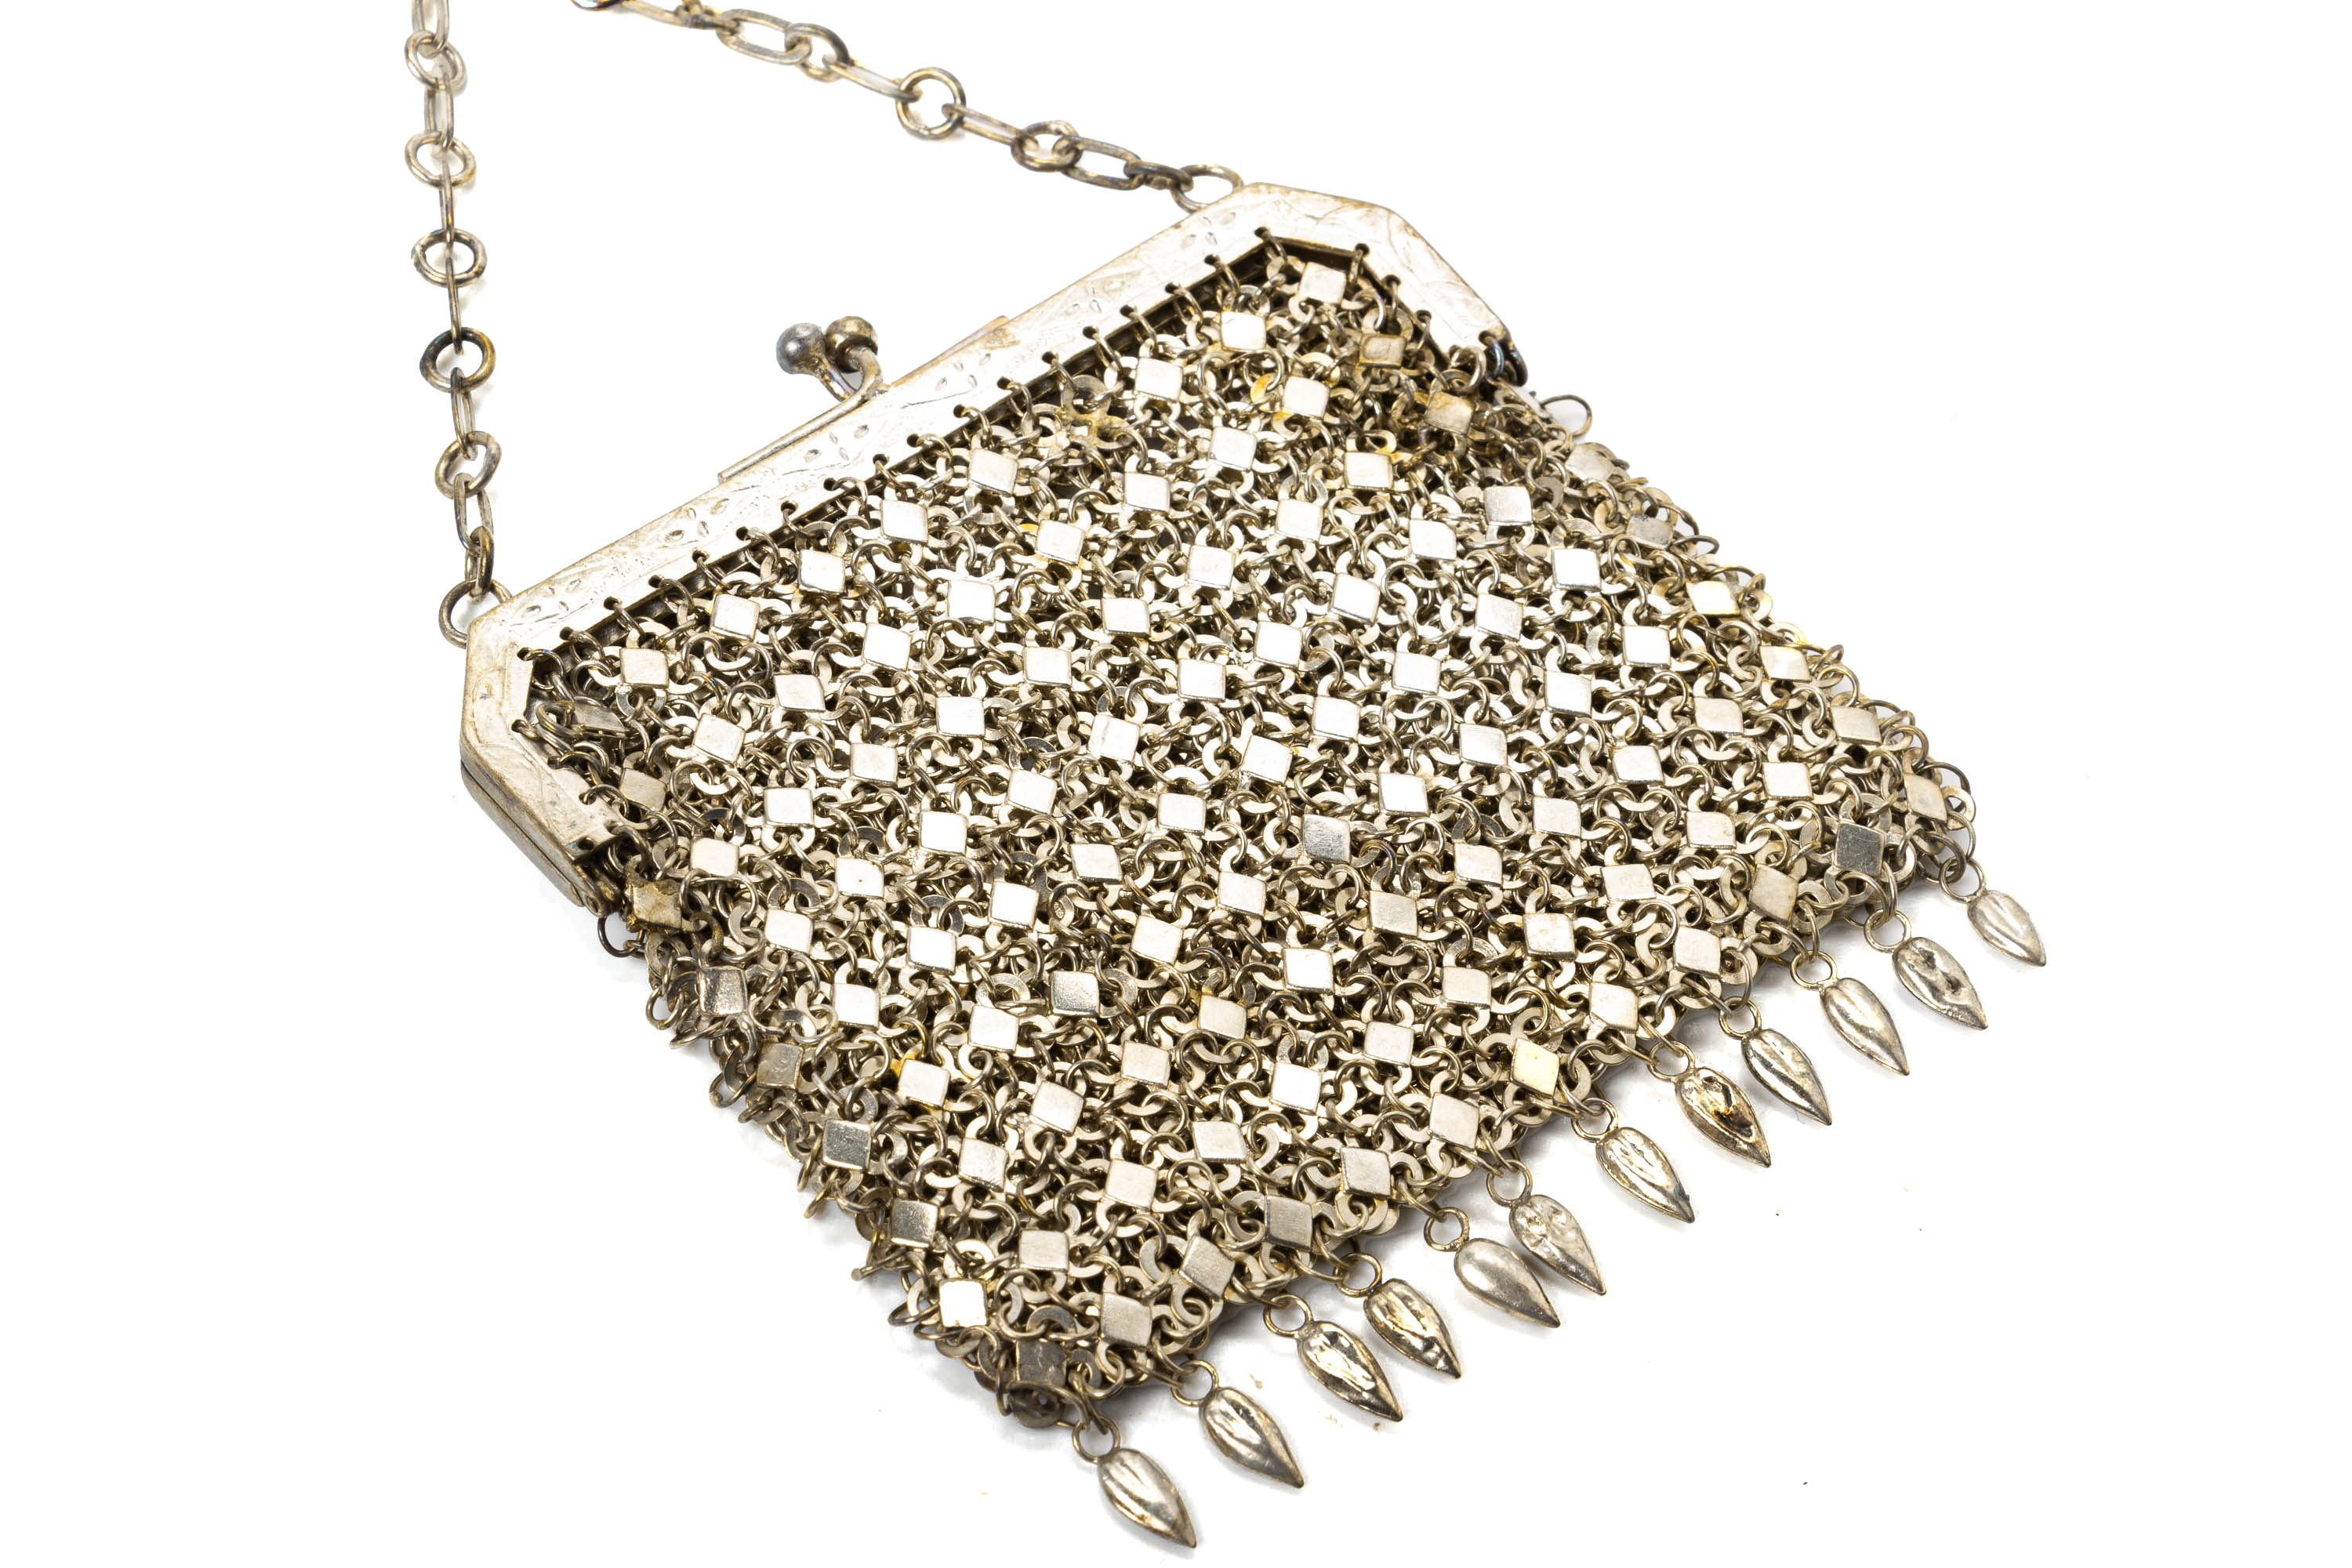 TWO WHITE METAL MESH PURSES WITH CHATELAINE CLIPS - Image 5 of 15